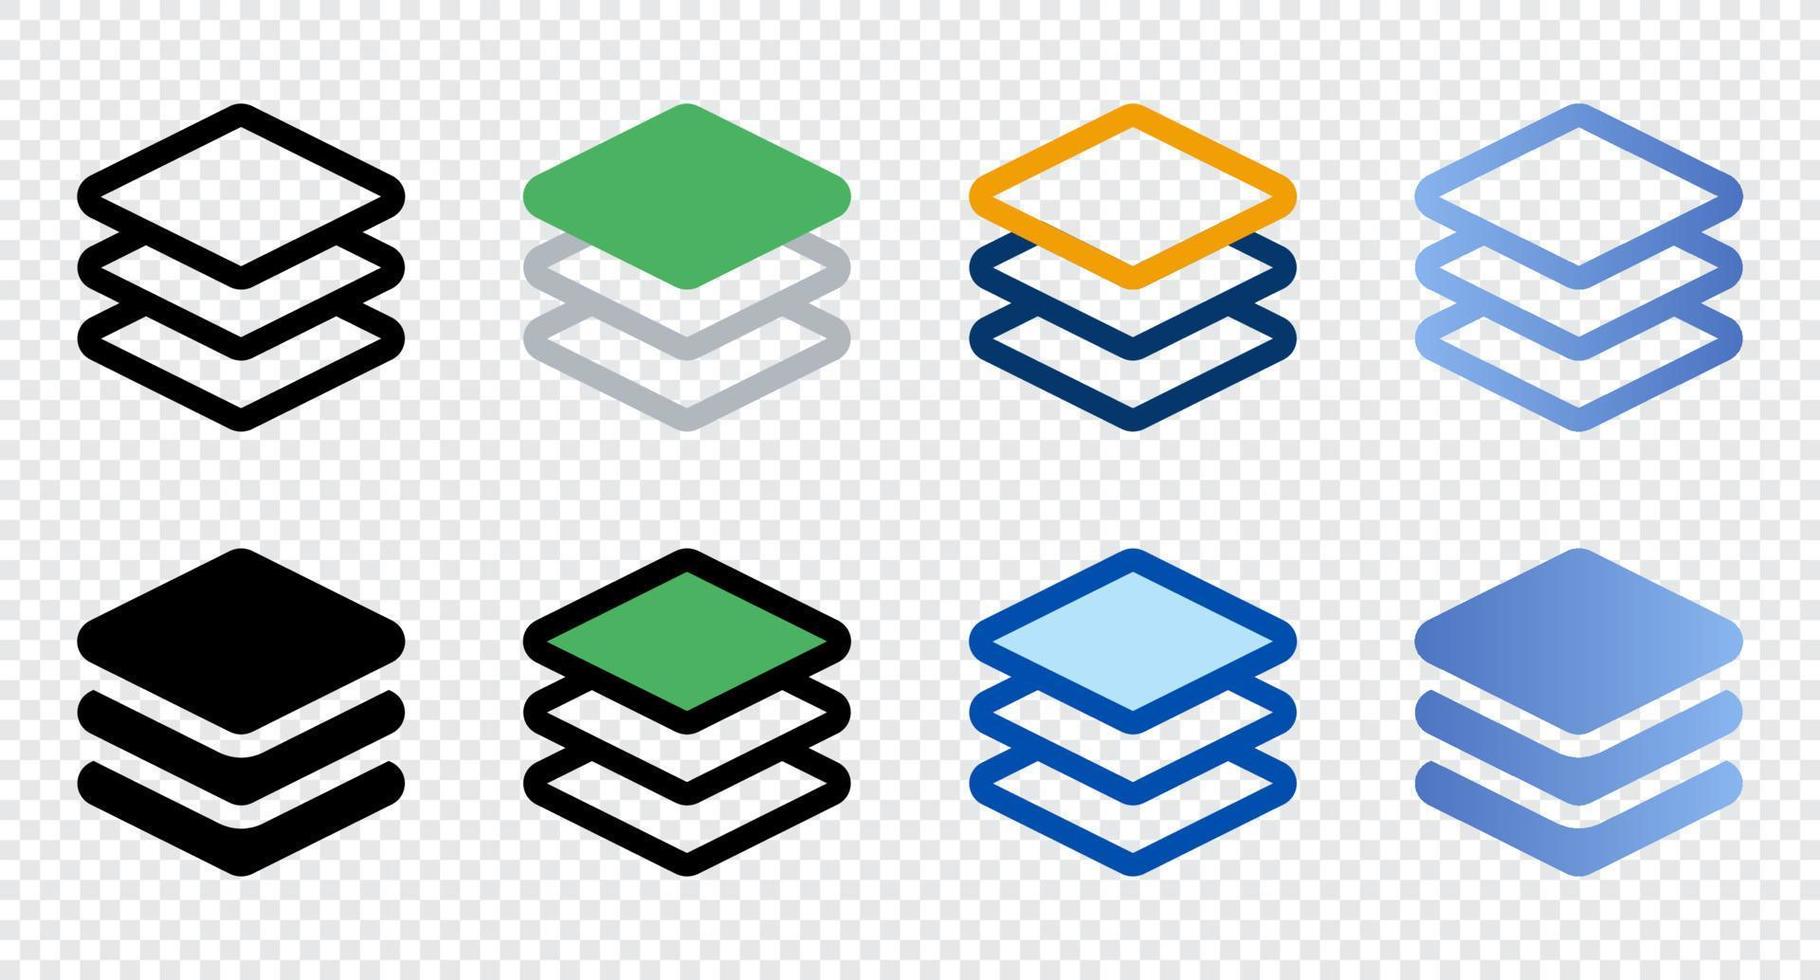 Layers icons in different style. Layers icons. Different style icons set. Vector illustration